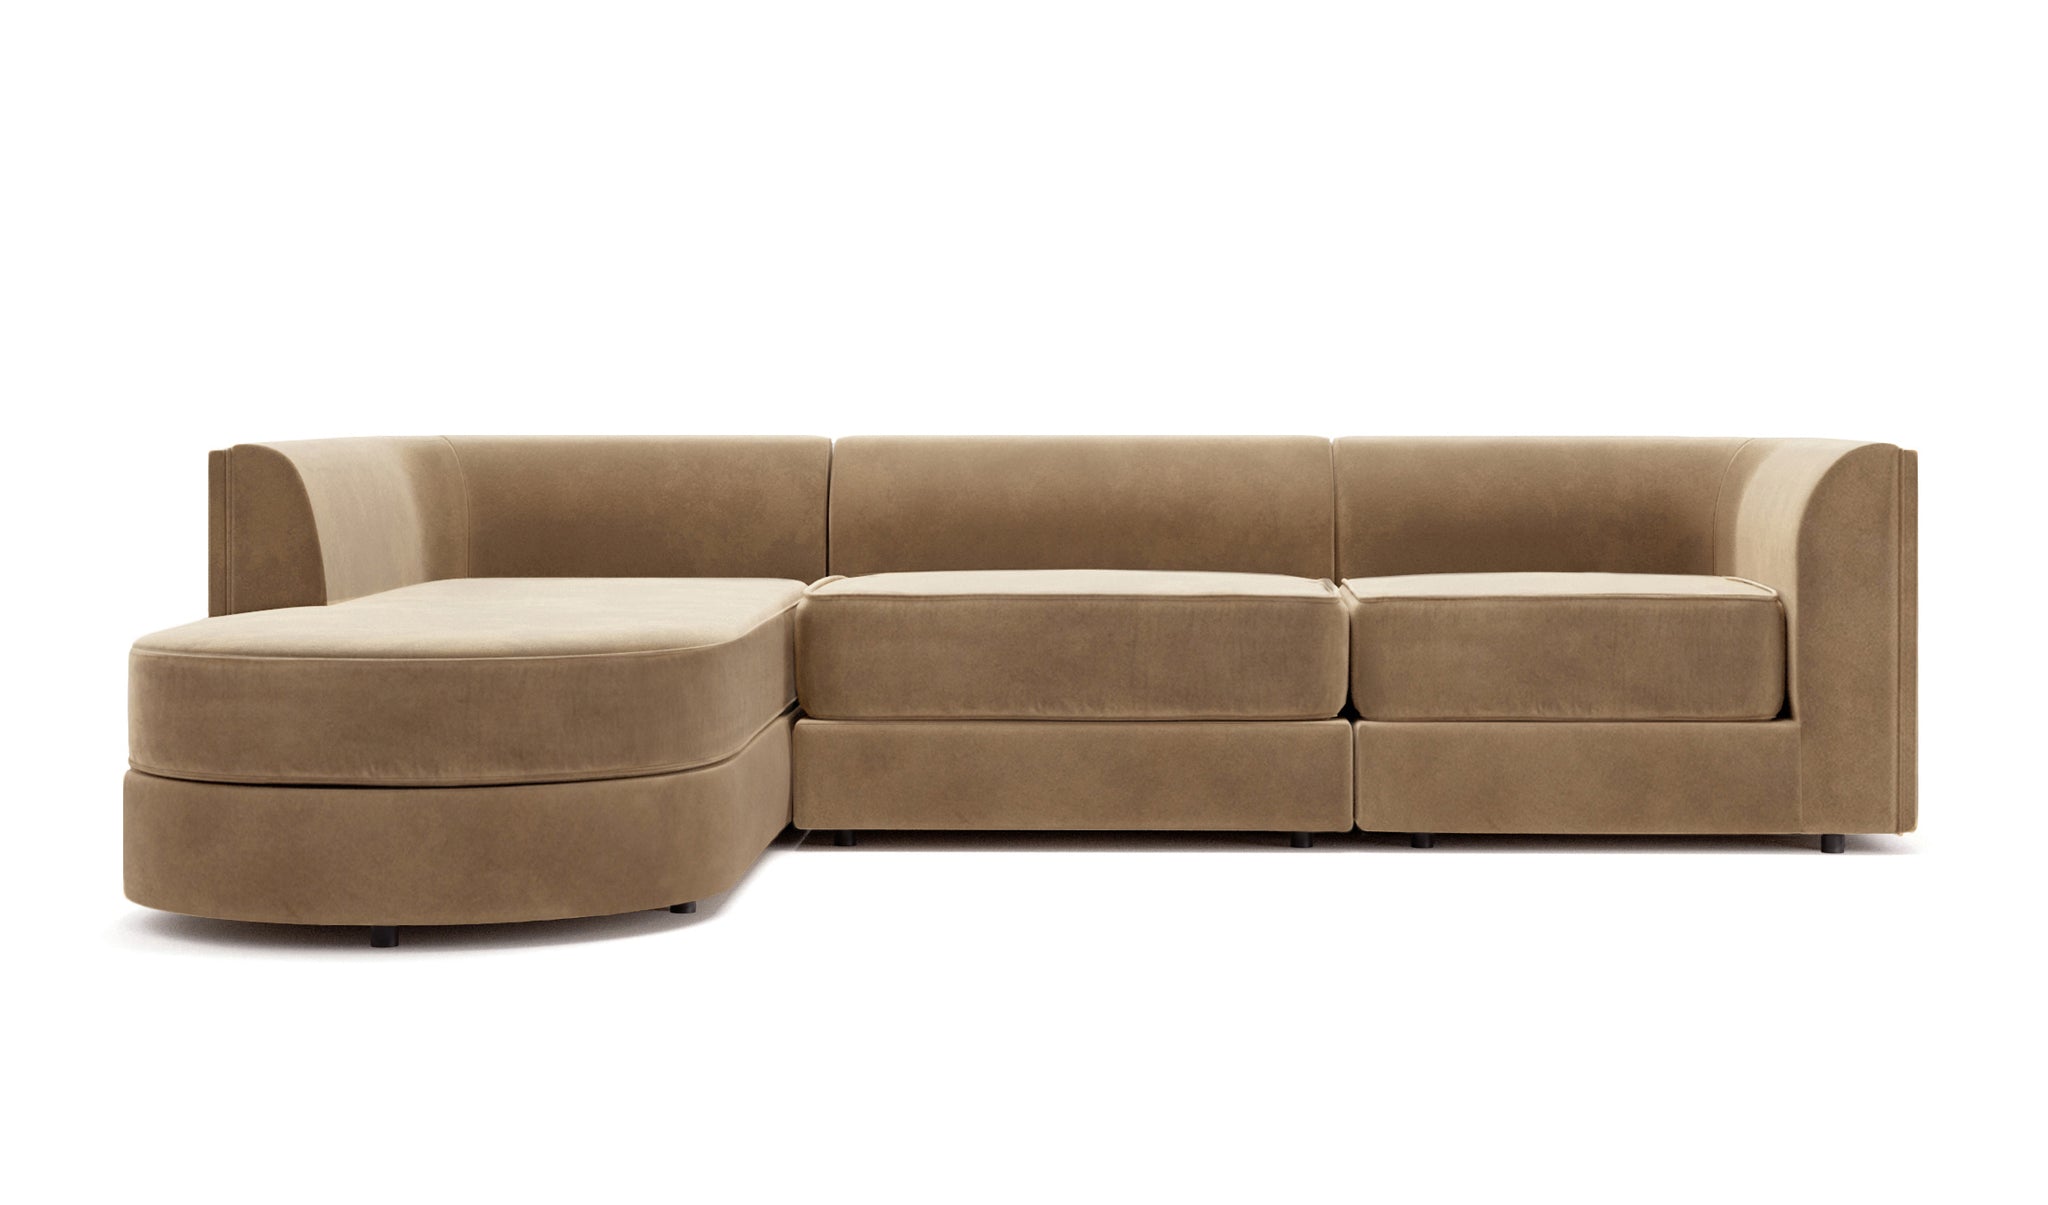 Maura 3-Seater Chaise Sectional